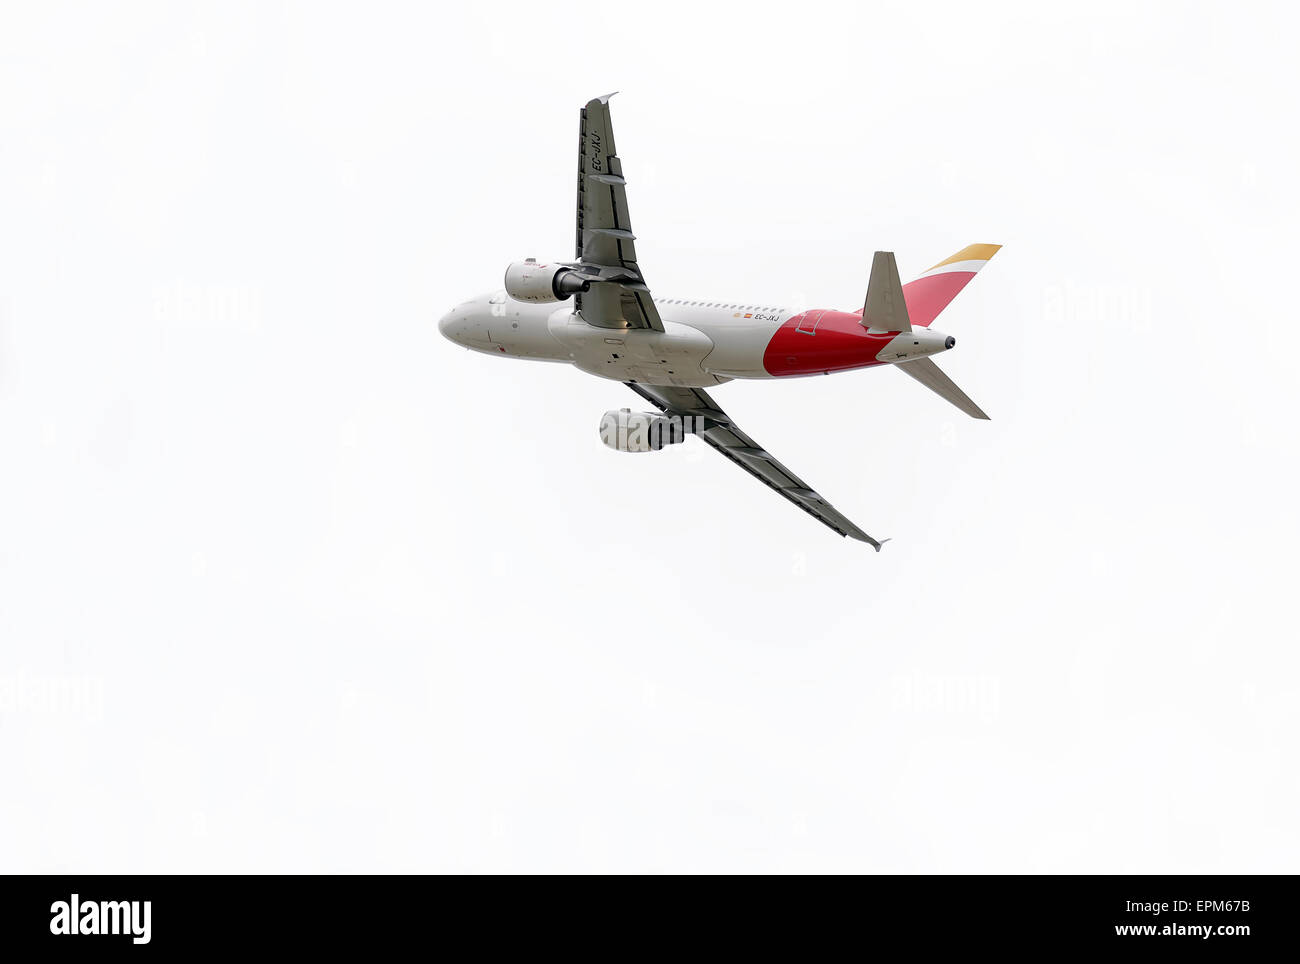 Aircraft -Airbus A319-, of -Iberia- airline, is taking off from Madrid-Barajas -Adolfo Suarez- airport. Stock Photo